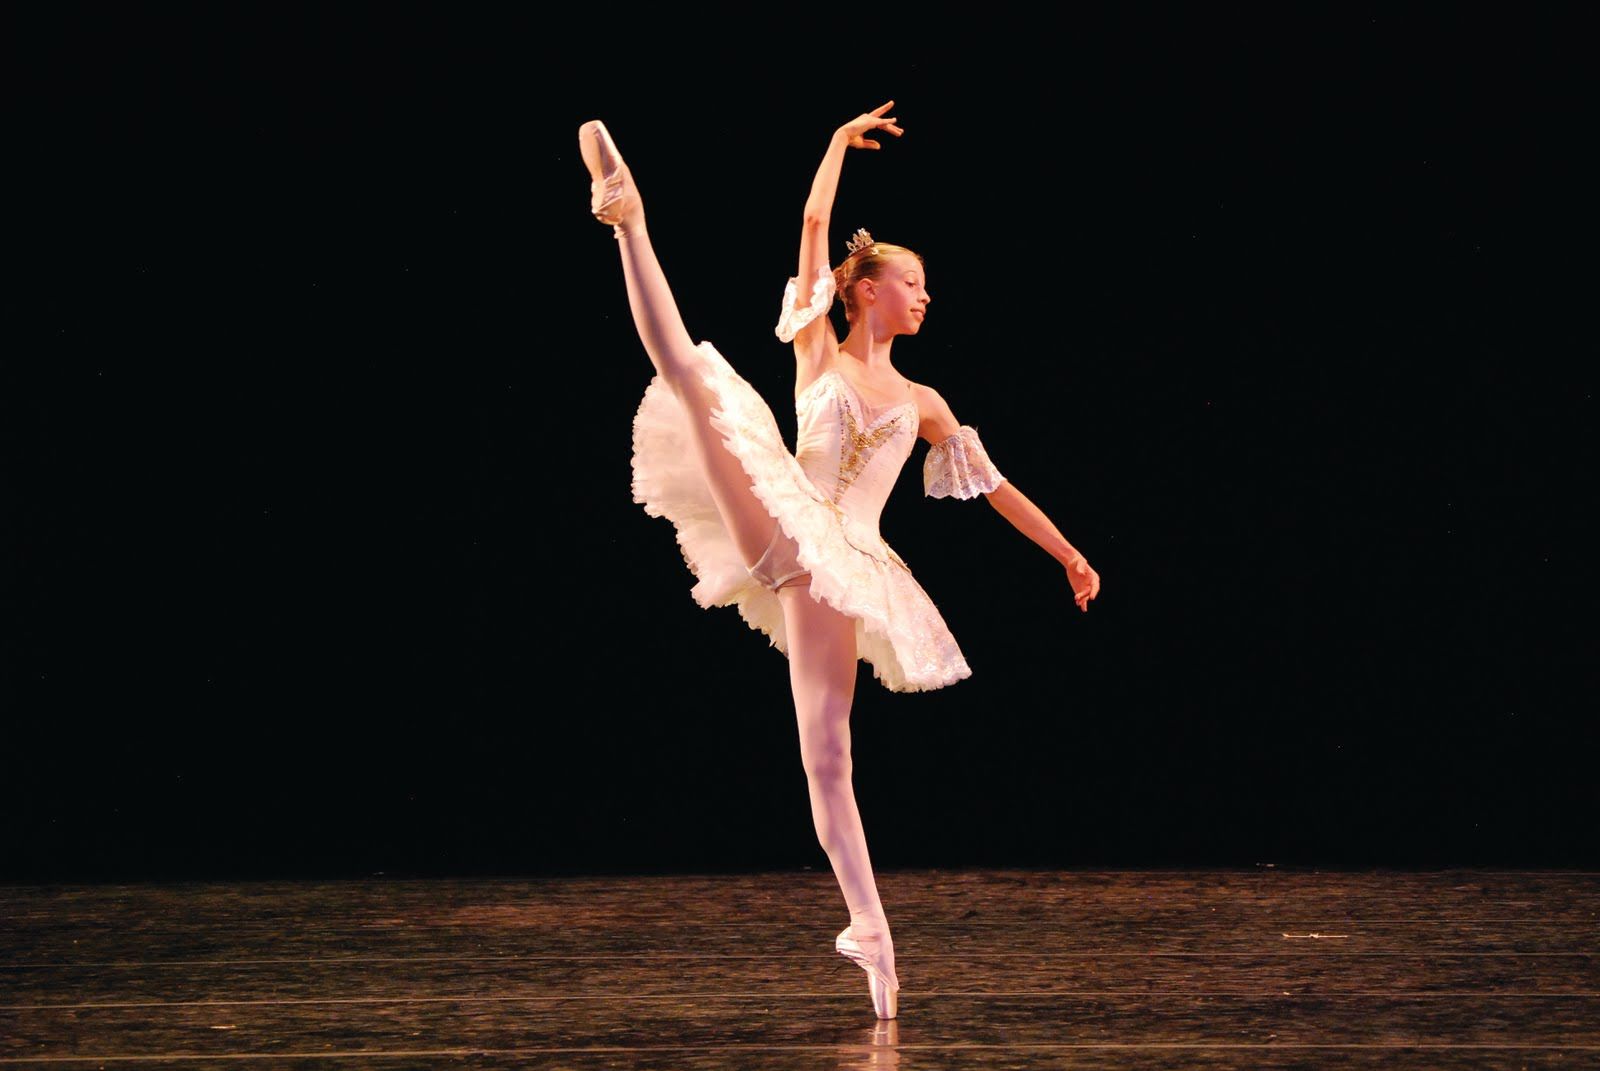 A woman in white ballet outfit on stage - Ballet, dance